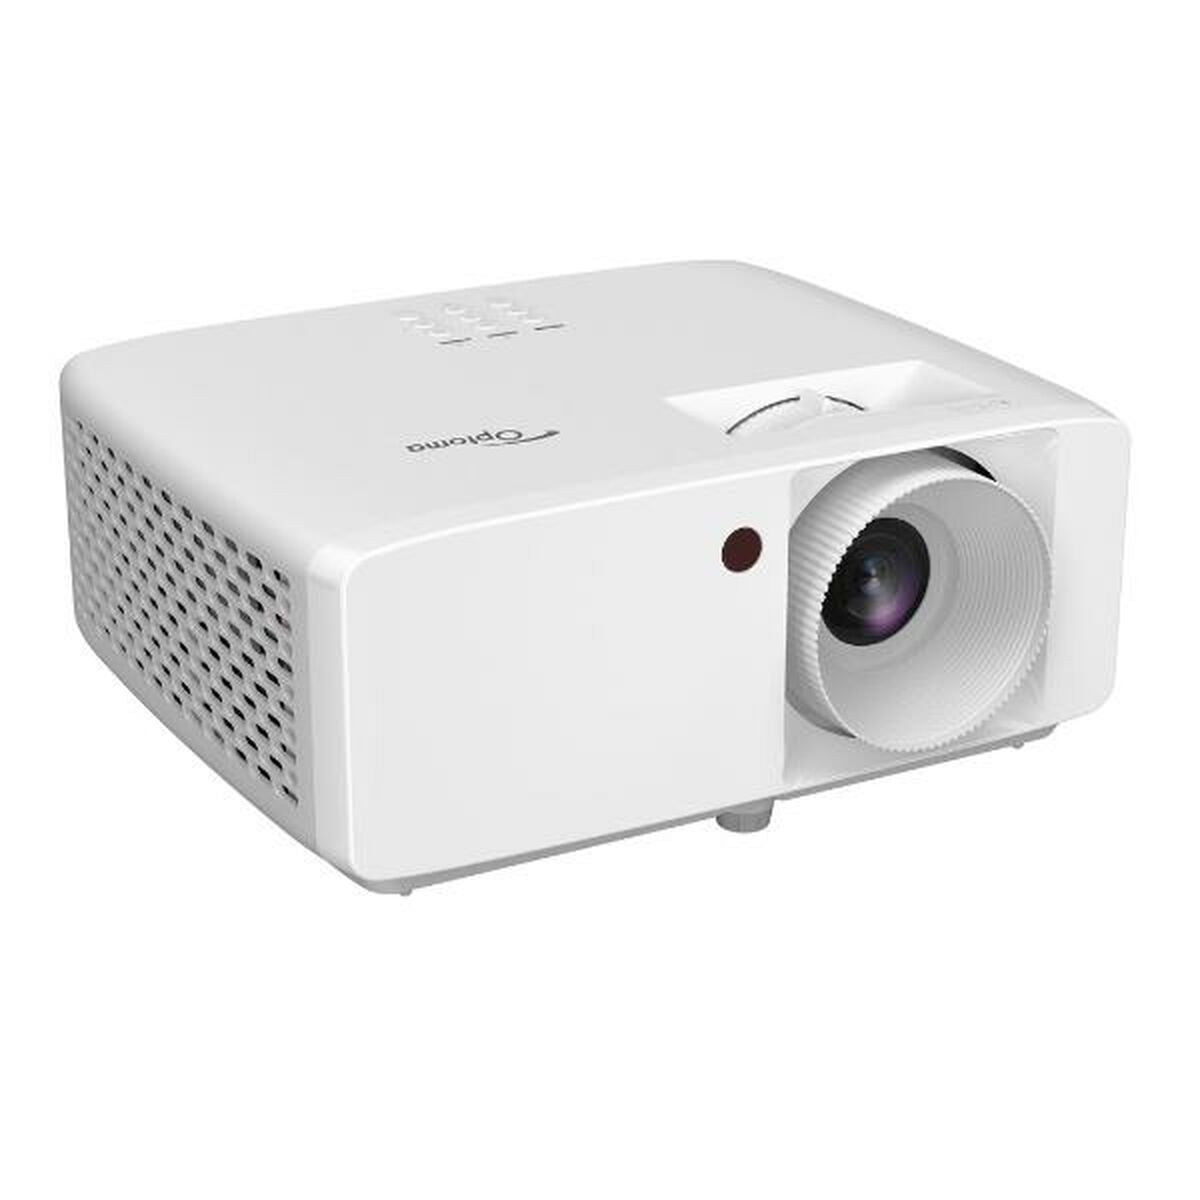 Projector Optoma HZ40HDR 4000 Lm 1920 x 1080 px, Optoma, Electronics, TV, Video and home cinema, projector-optoma-hz40hdr-4000-lm-1920-x-1080-px, Brand_Optoma, category-reference-2609, category-reference-2642, category-reference-2947, category-reference-t-18805, category-reference-t-18811, category-reference-t-19653, cinema and television, computers / peripherals, Condition_NEW, entertainment, office, Price_+ 1000, RiotNook